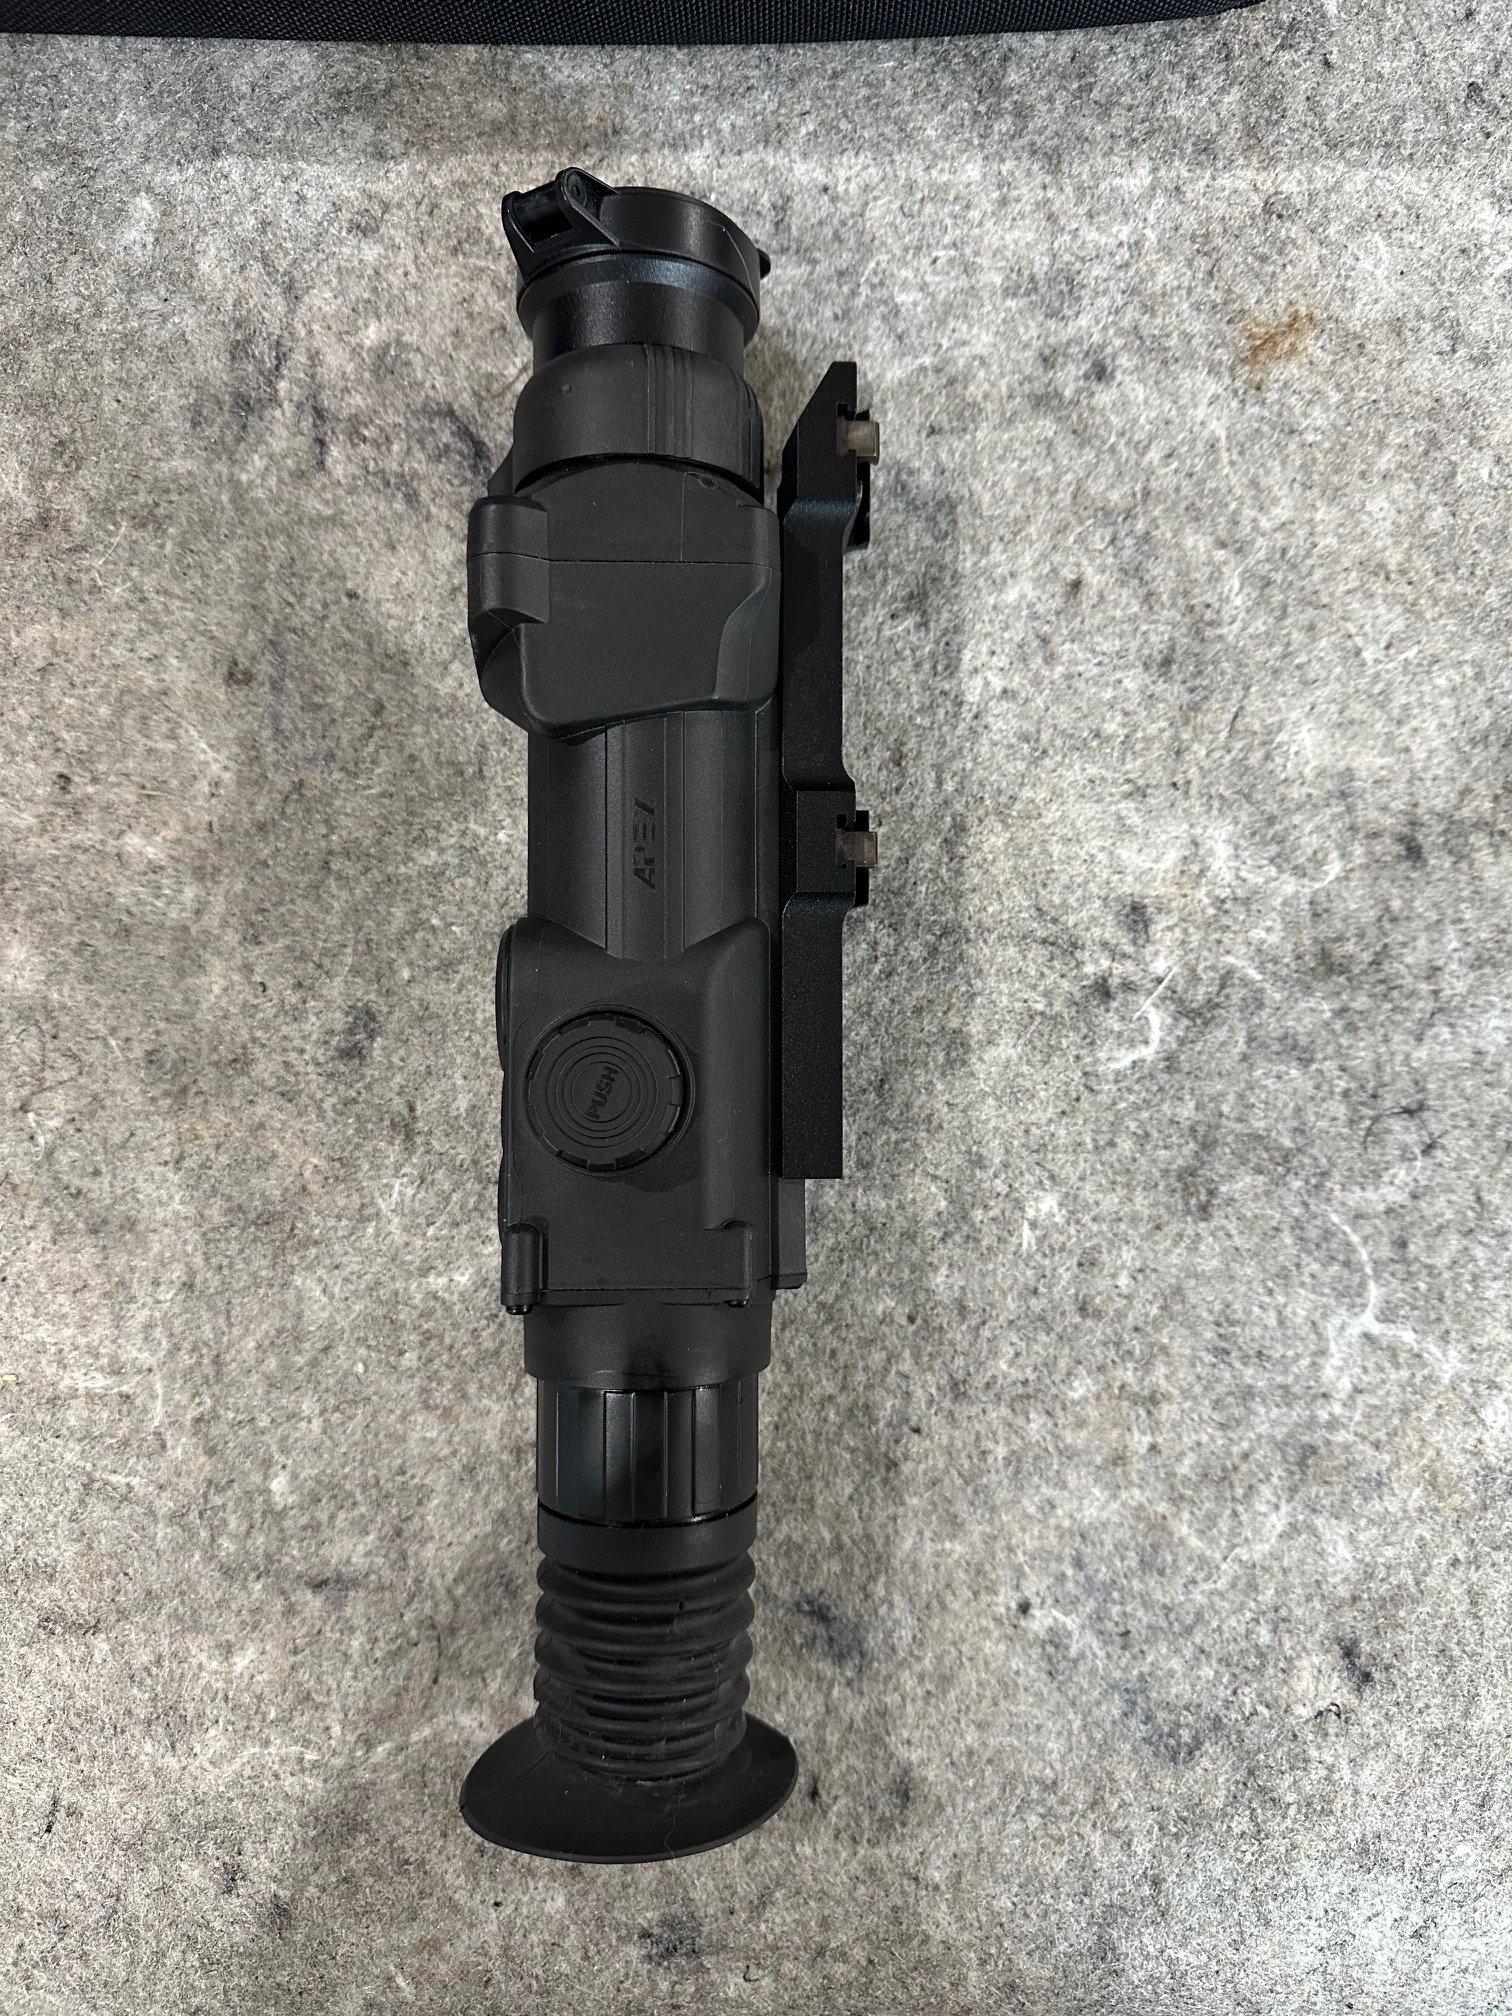 Night Vision - Pulsar Apex XD50A 2-8x42 Thermal Scope | Sniper's Hide Forum